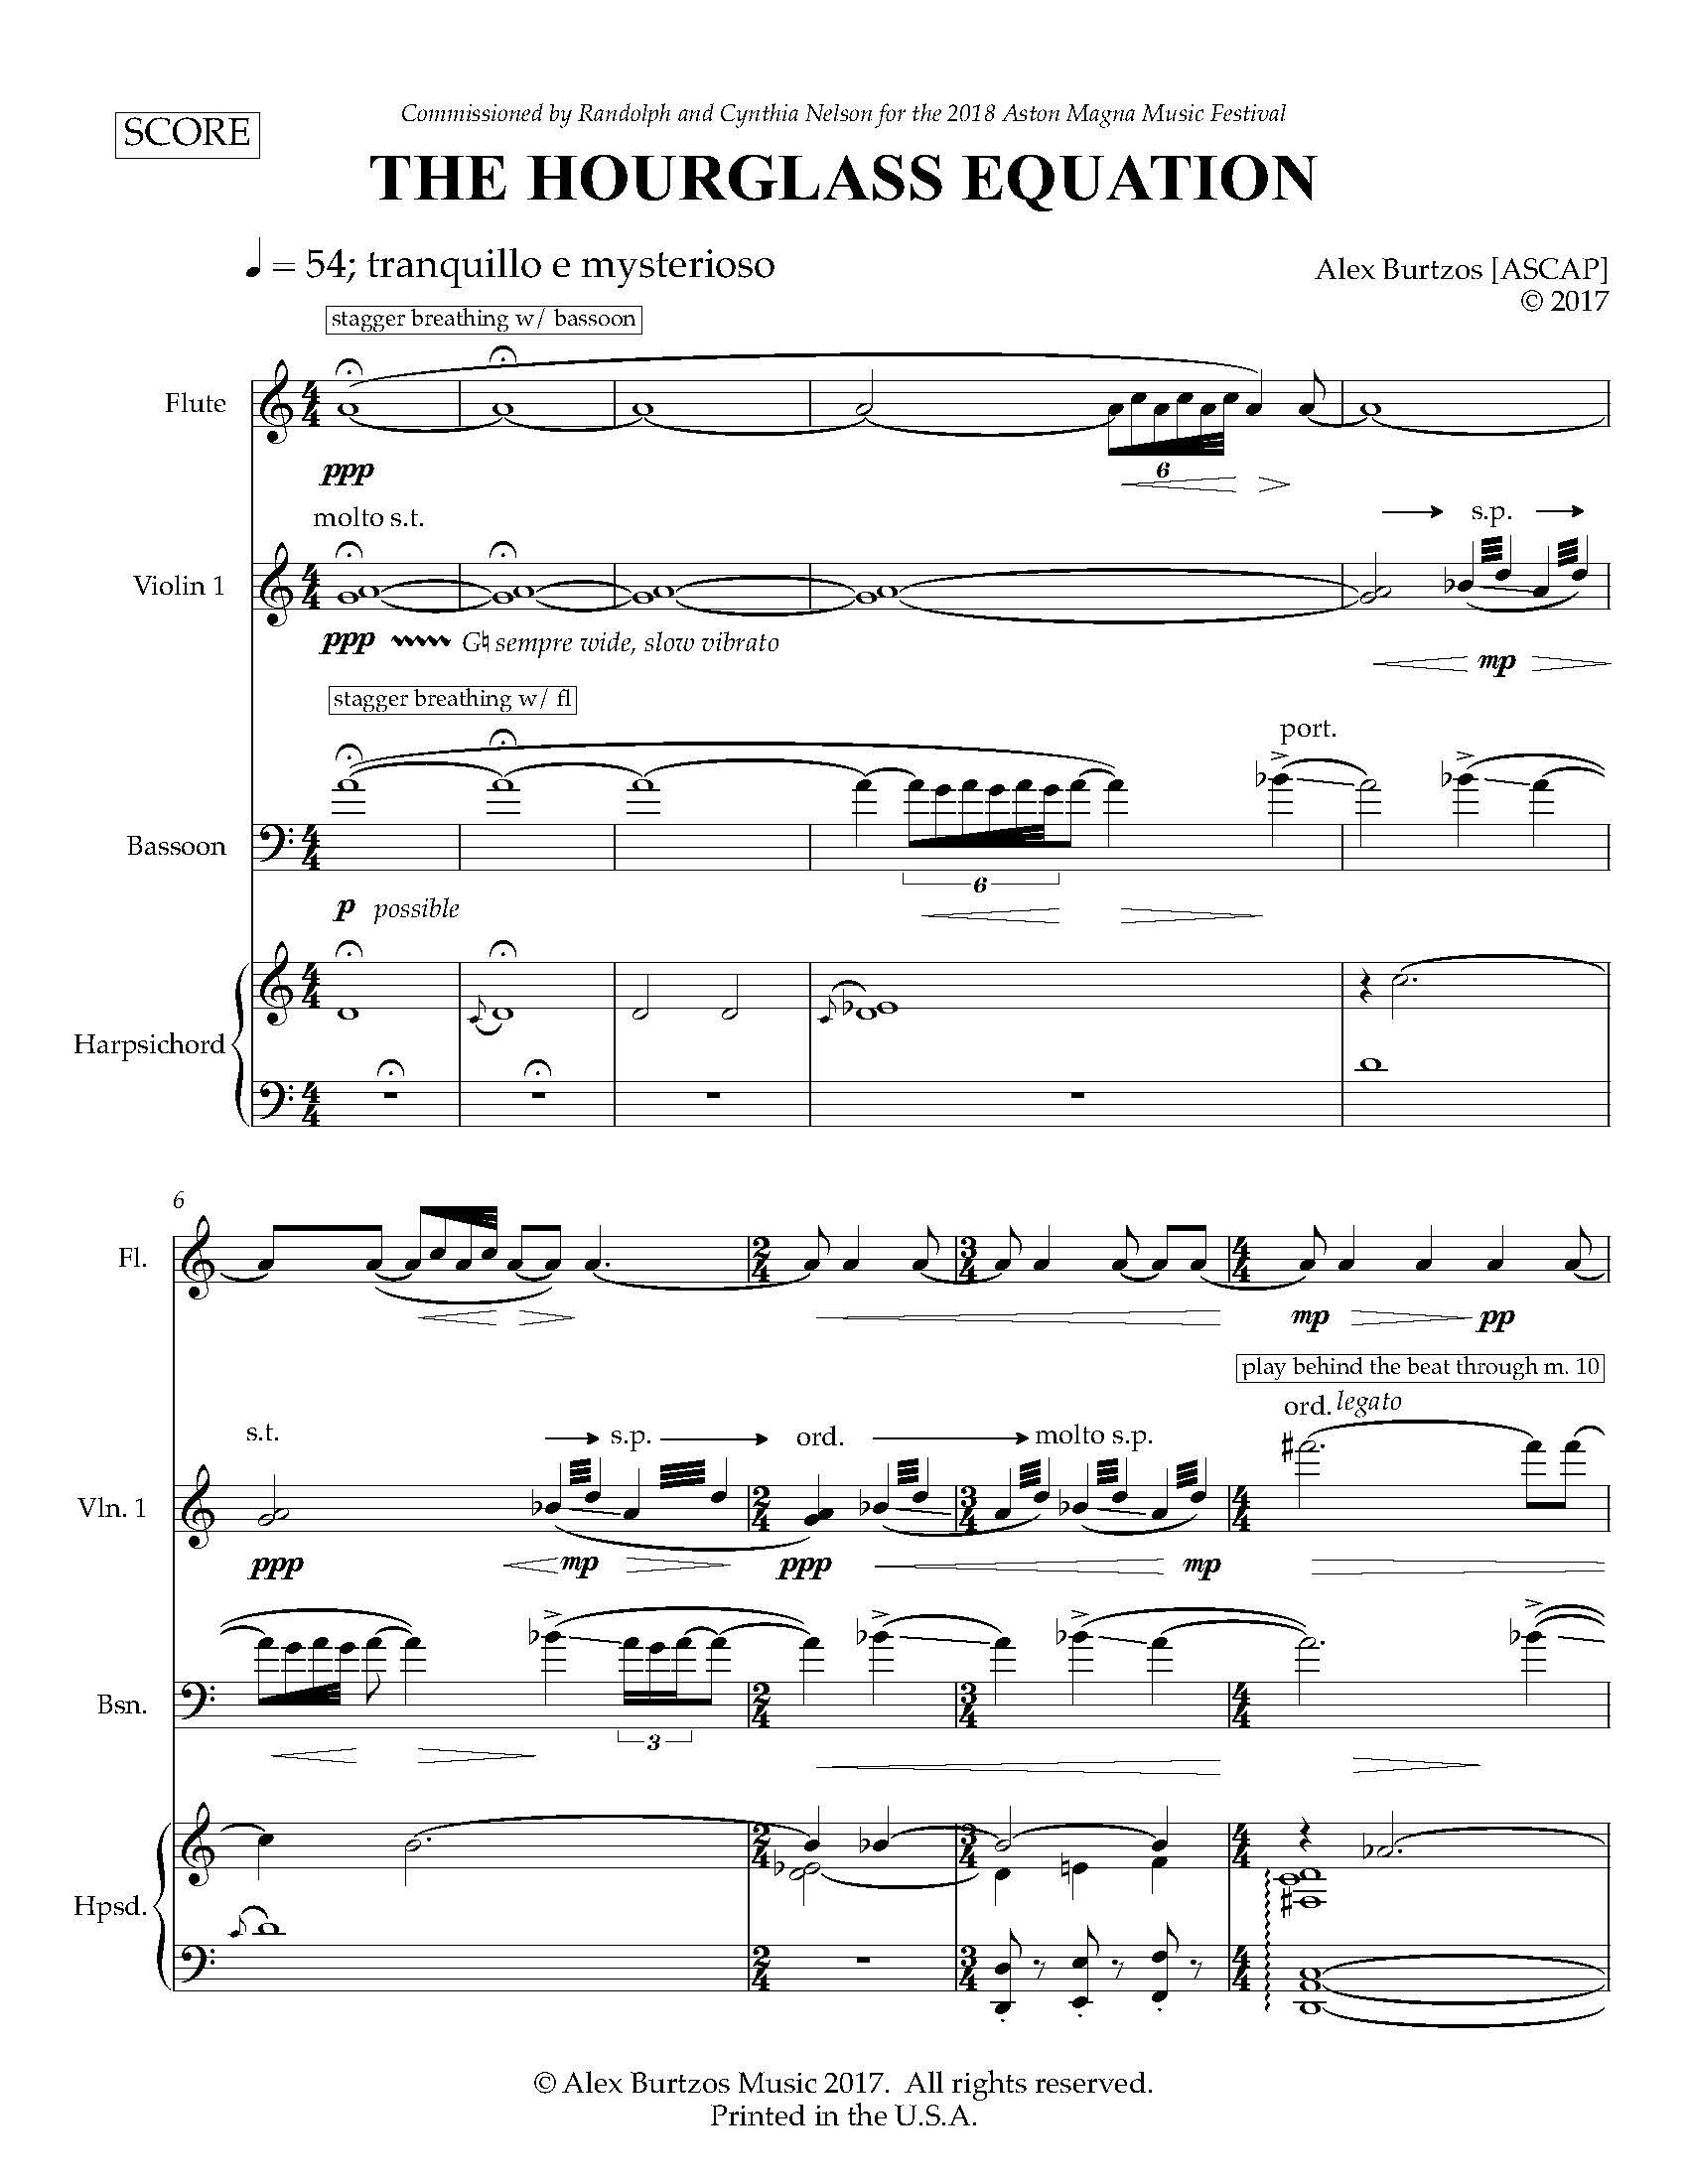 The Hourglass Equation - Complete Score_Page_07.jpg